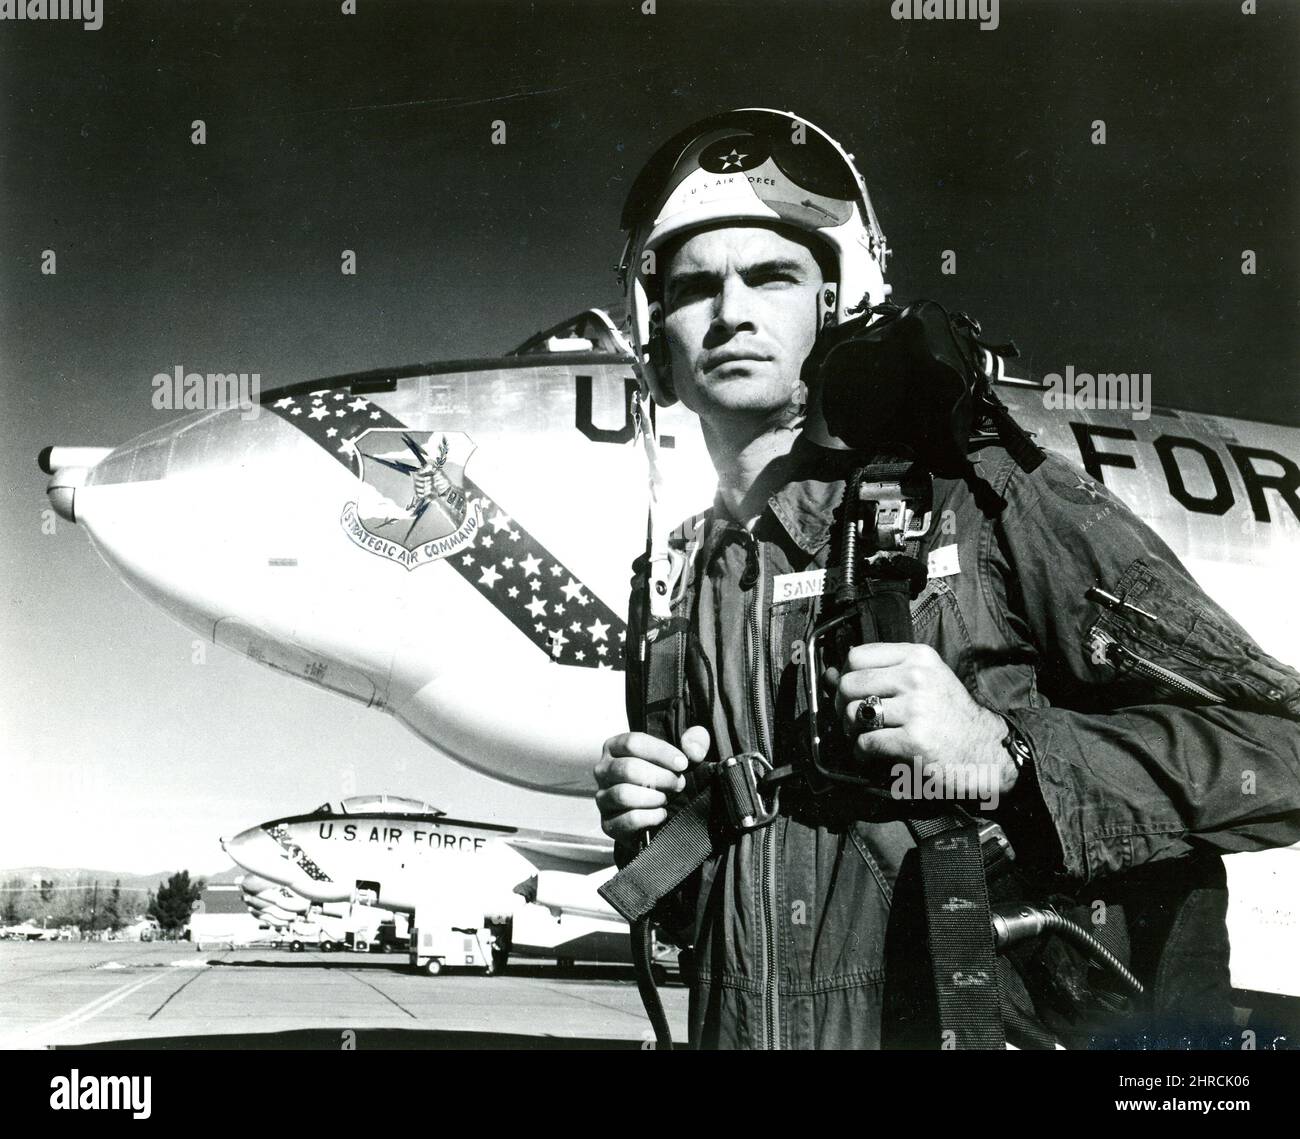 1957 - The crest on this Strategic Air Command B-47 bomber and every SAC plane conveys the mission of its men and weapons. The Command crest of SAC depicts a mailed fist, holding in readiness symbolic lightning bolts of destruction and an olive branch of peace. Standing by the bomber is a typical SAC pilot. Stock Photo